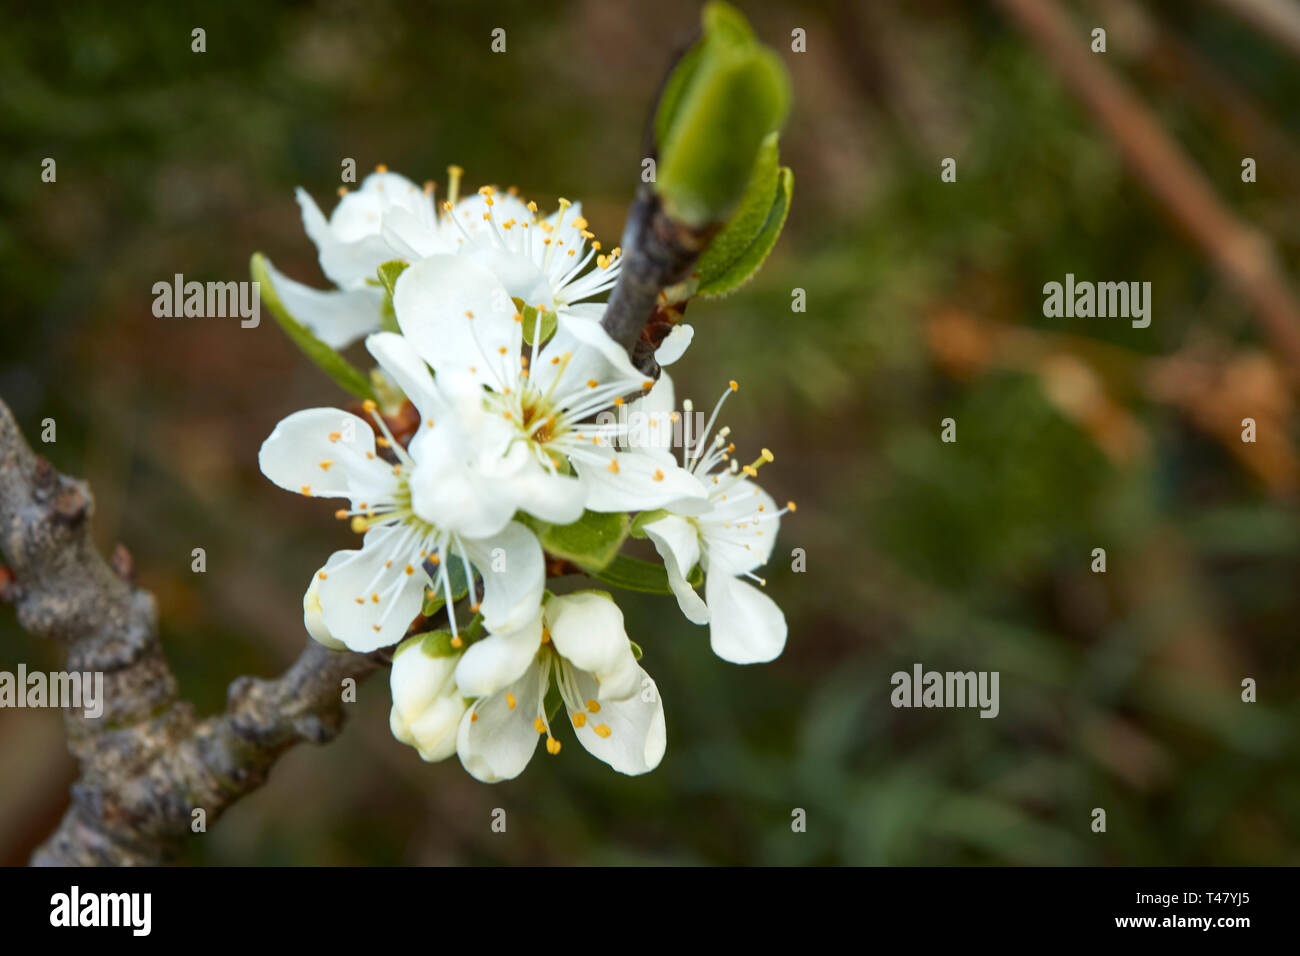 White Greengage blossom flowers in spring in a London urban garden, London, England, United Kingdom, Europe Stock Photo